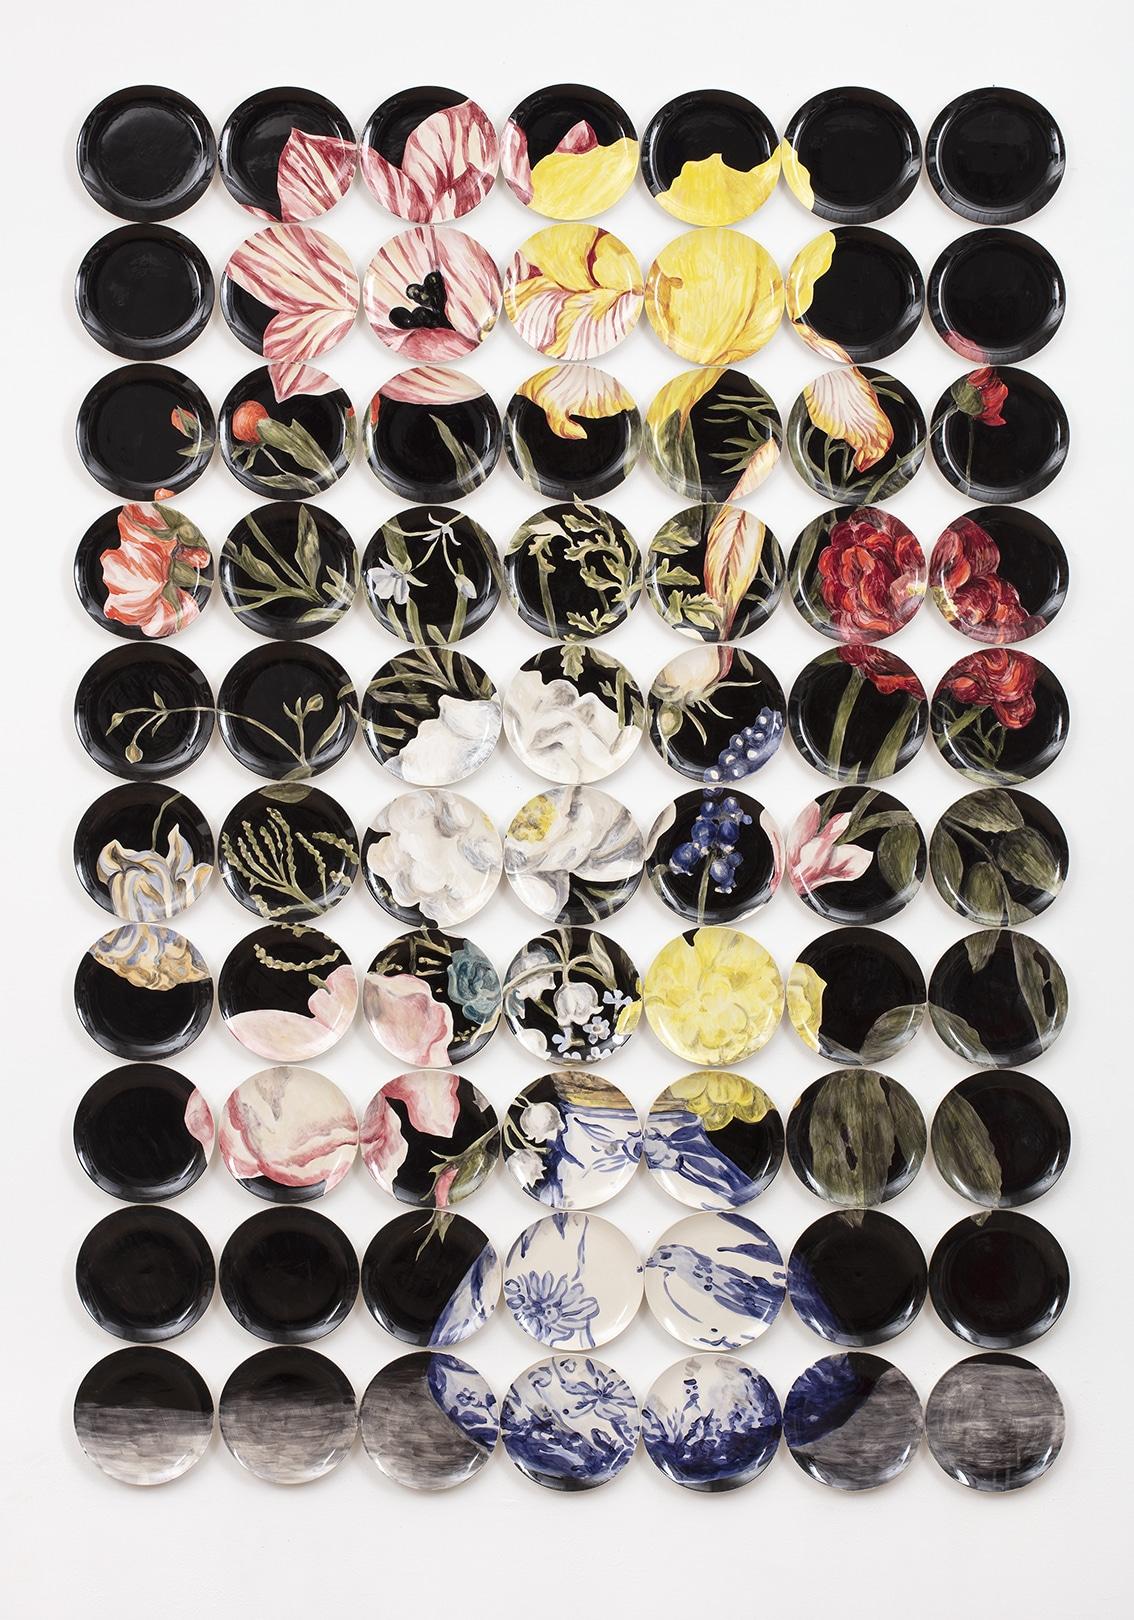 Using ceramic surfaces as her canvas Hatch extends her historically-inspired contemporary repertoire with Memorandum, a wall installation comprised of 35 hand-painted plates.  The central image of the work, a large vase of vibrantly painted flowers